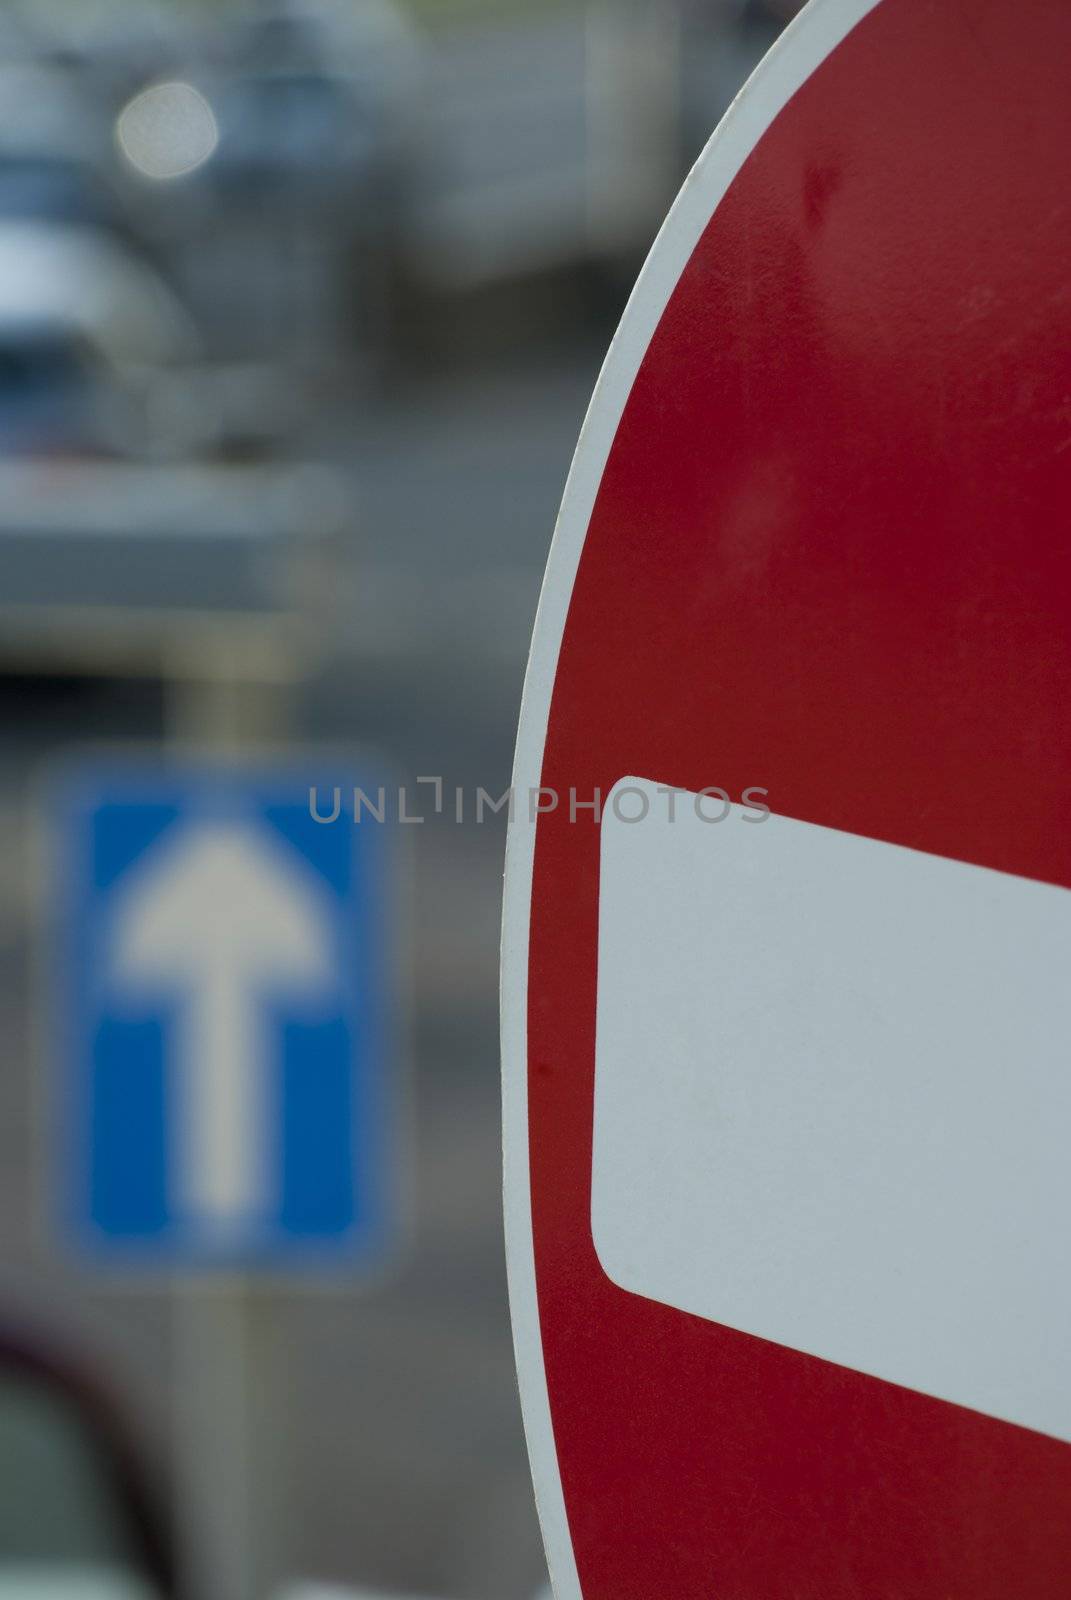 Traffic scene in a UK city, showing closeup of no-entry sign in the foreground, with a one-way sign and traffic queue in soft focus in the background.